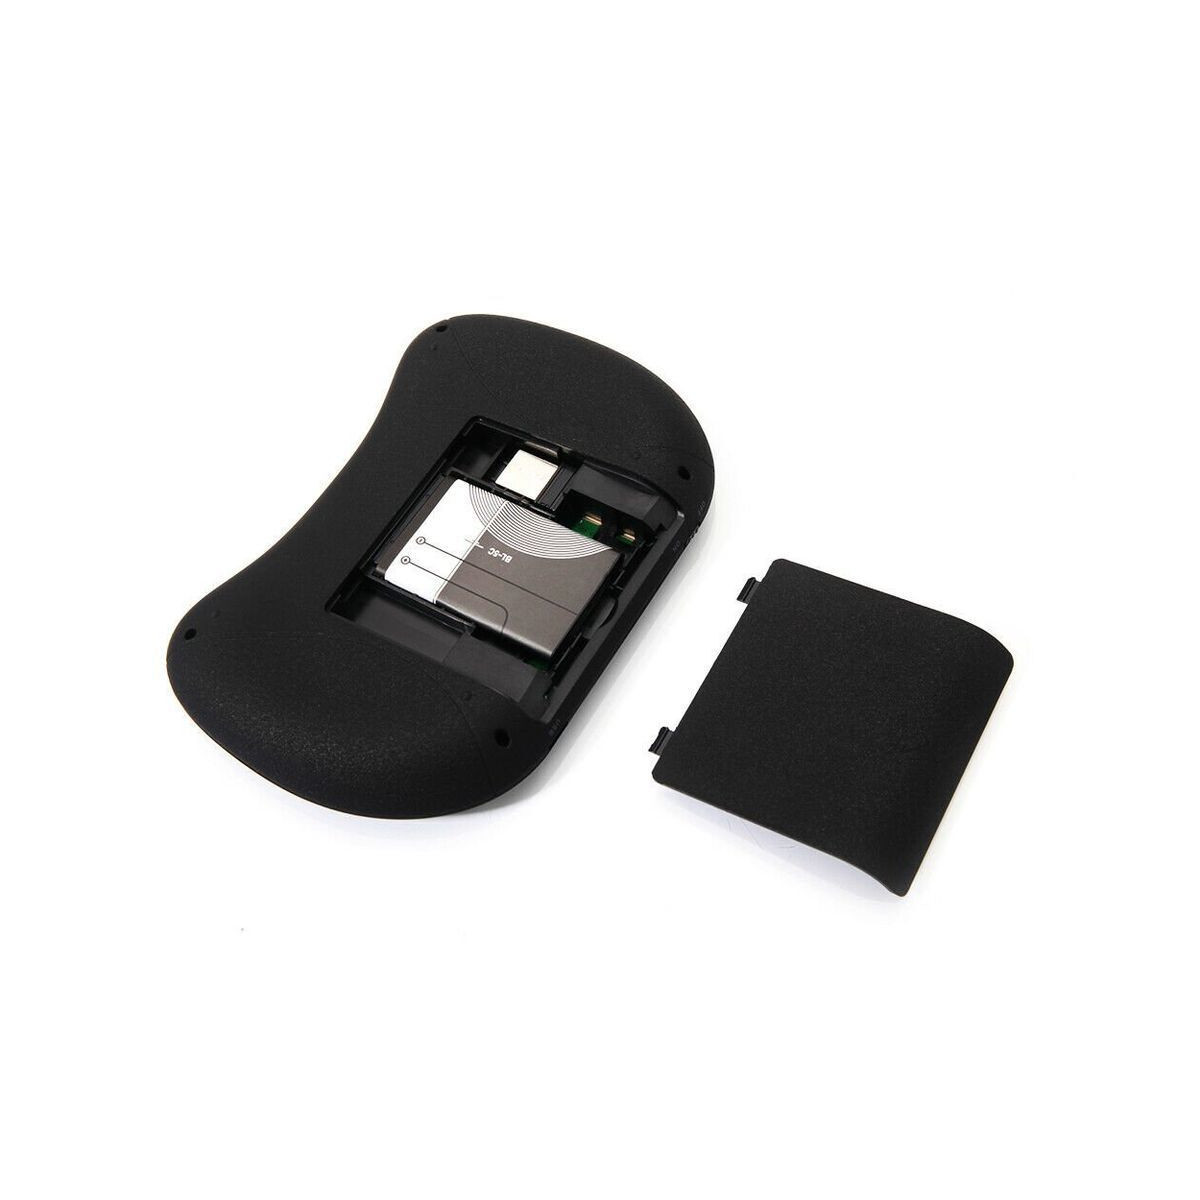 BES-20761 - Mouse e Tastiere - beselettronica - MINI TASTIERA QWERTY  TELECOMANDO BLUETOOTH MOUSE TOUCHPAD PC ANDROID TV TABLET